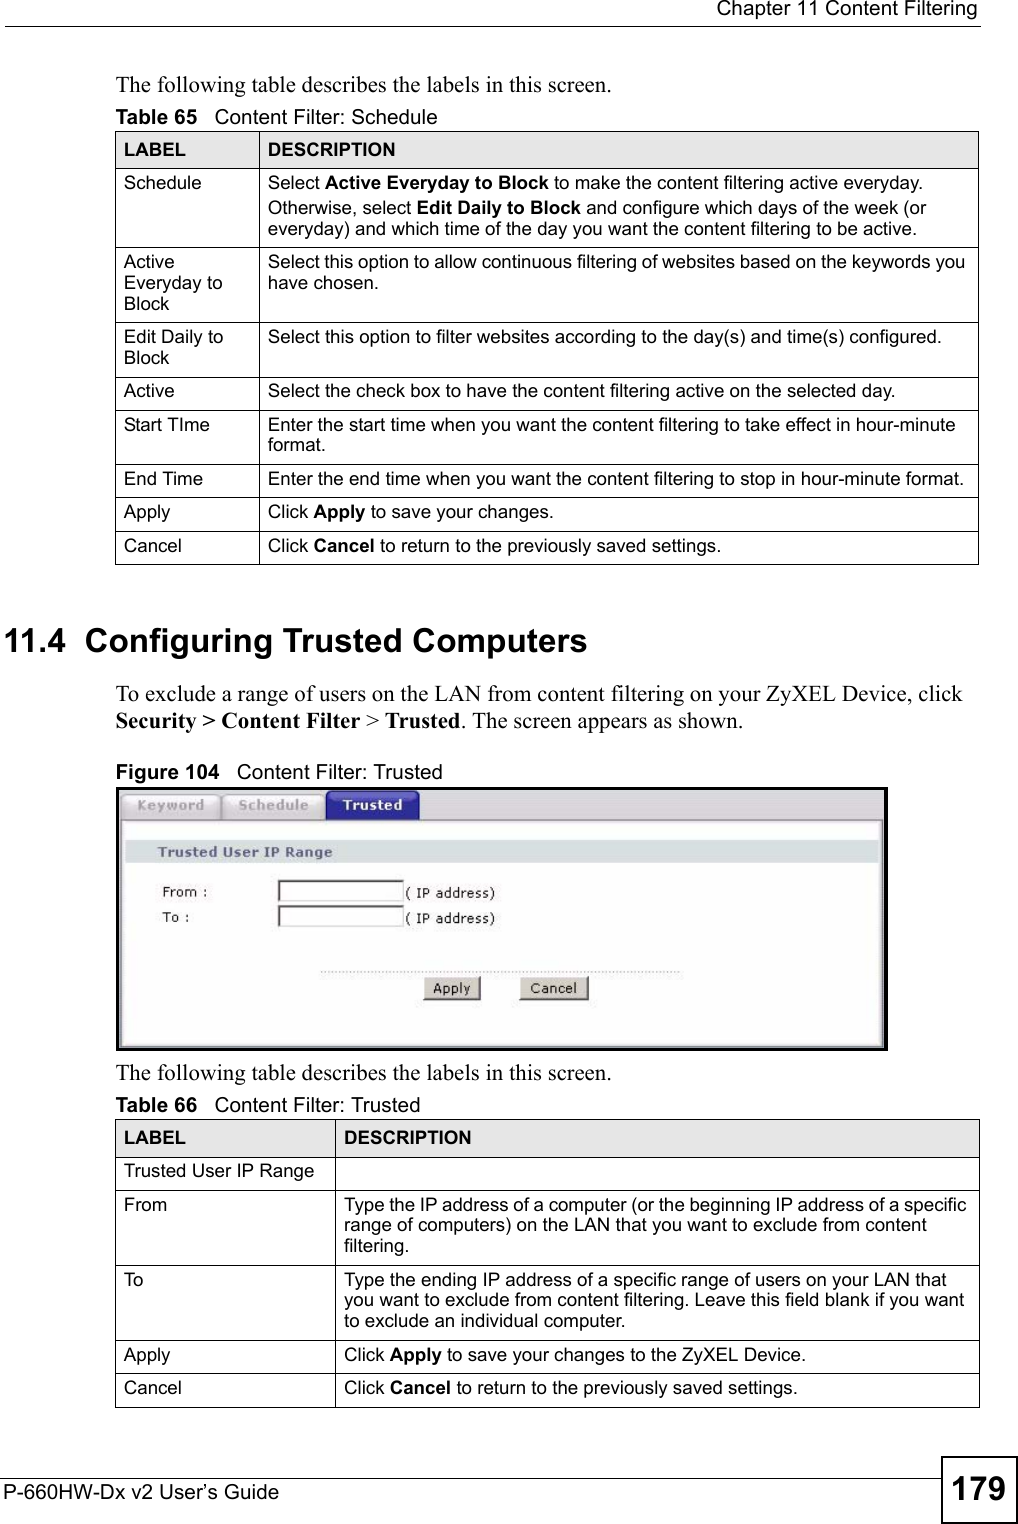  Chapter 11 Content FilteringP-660HW-Dx v2 User’s Guide 179The following table describes the labels in this screen.  11.4  Configuring Trusted Computers To exclude a range of users on the LAN from content filtering on your ZyXEL Device, click Security &gt; Content Filter &gt; Trusted. The screen appears as shown.Figure 104   Content Filter: TrustedThe following table describes the labels in this screen. Table 65   Content Filter: ScheduleLABEL DESCRIPTIONSchedule Select Active Everyday to Block to make the content filtering active everyday.Otherwise, select Edit Daily to Block and configure which days of the week (or everyday) and which time of the day you want the content filtering to be active. Active Everyday to BlockSelect this option to allow continuous filtering of websites based on the keywords you have chosen.Edit Daily to BlockSelect this option to filter websites according to the day(s) and time(s) configured.Active Select the check box to have the content filtering active on the selected day.Start TIme Enter the start time when you want the content filtering to take effect in hour-minute format.End Time Enter the end time when you want the content filtering to stop in hour-minute format. Apply  Click Apply to save your changes. Cancel Click Cancel to return to the previously saved settings.Table 66   Content Filter: TrustedLABEL DESCRIPTIONTrusted User IP RangeFrom Type the IP address of a computer (or the beginning IP address of a specific range of computers) on the LAN that you want to exclude from content filtering. To Type the ending IP address of a specific range of users on your LAN that you want to exclude from content filtering. Leave this field blank if you want to exclude an individual computer.Apply  Click Apply to save your changes to the ZyXEL Device. Cancel Click Cancel to return to the previously saved settings.